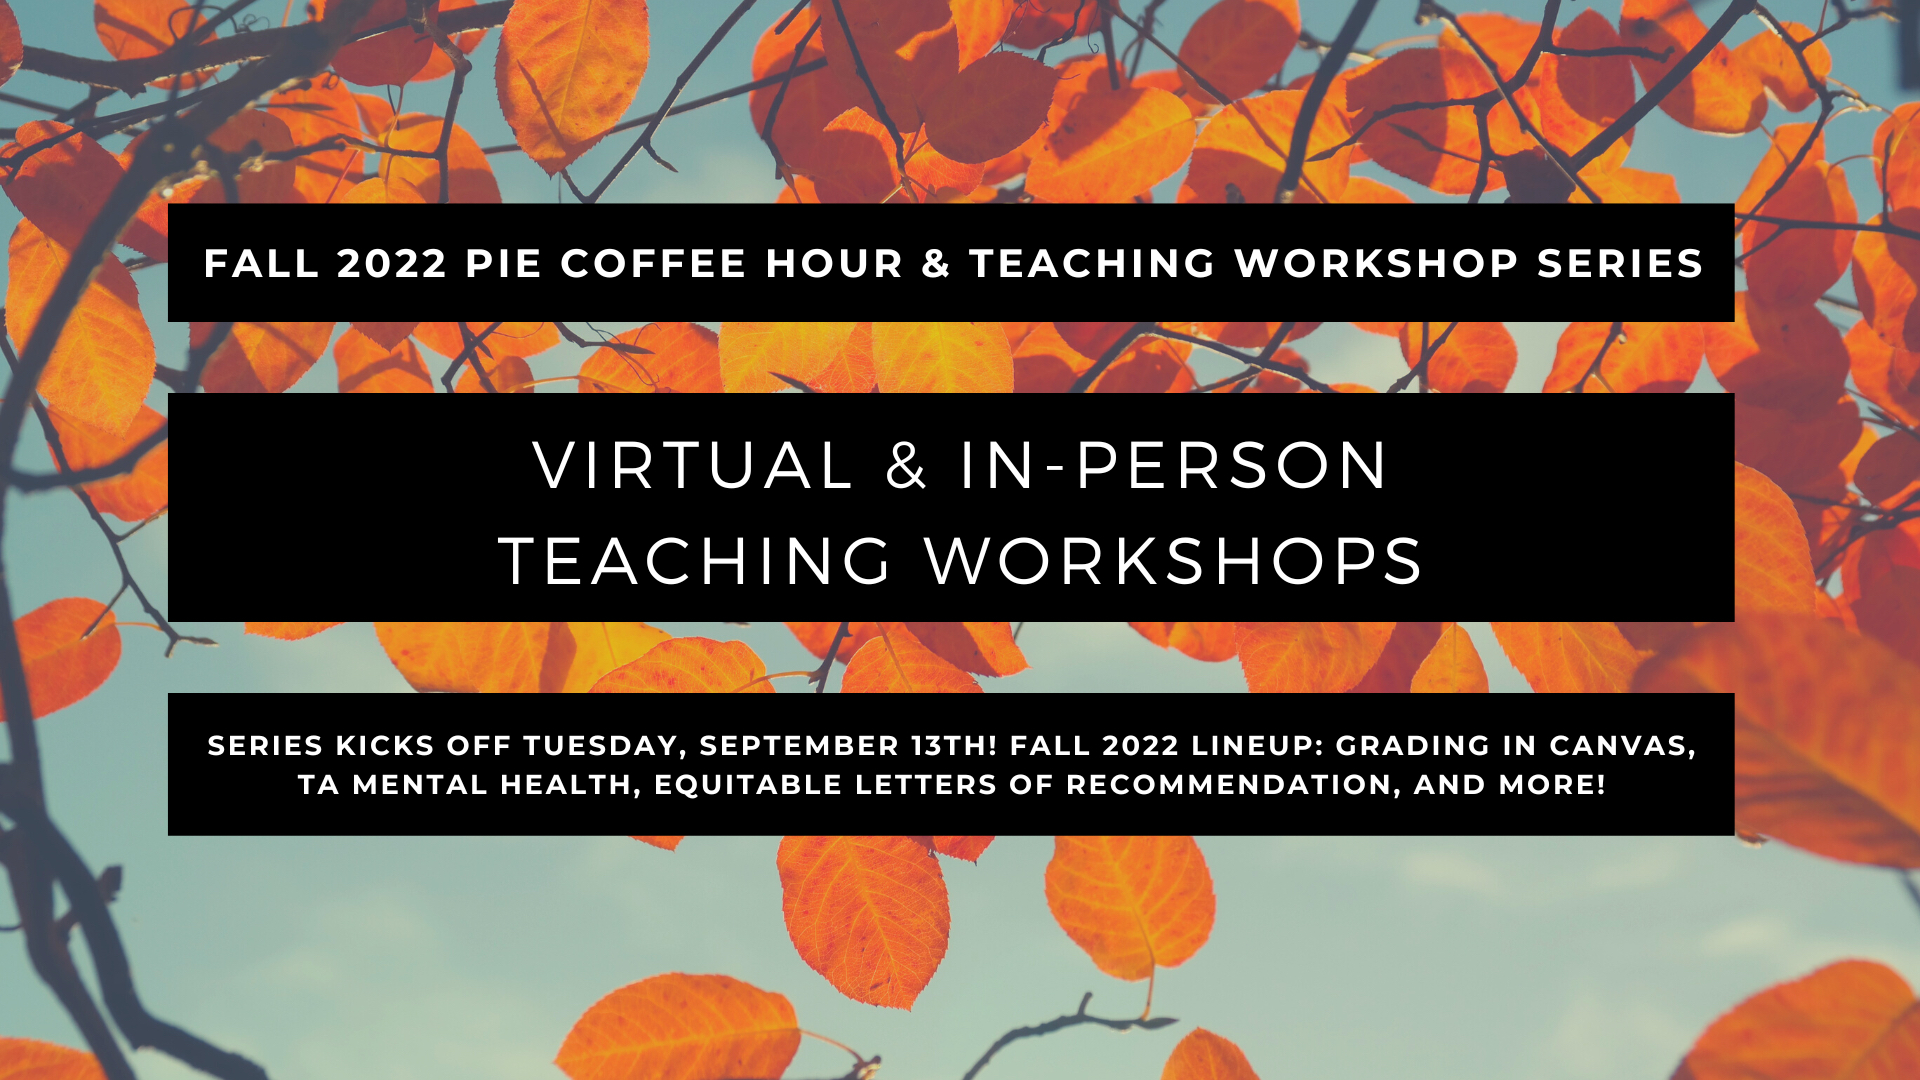 Orange leaves against a robin's-egg blue sky. Fall 2022 PIE Coffee Hour & Teaching Workshop Series: Virtual & In-Person Teaching Workshops. Series kicks off tuesday, September 13th! Fall 2022 lineup: grading in Canvas, TA mental health, equitable letters of recommendation, and more! 